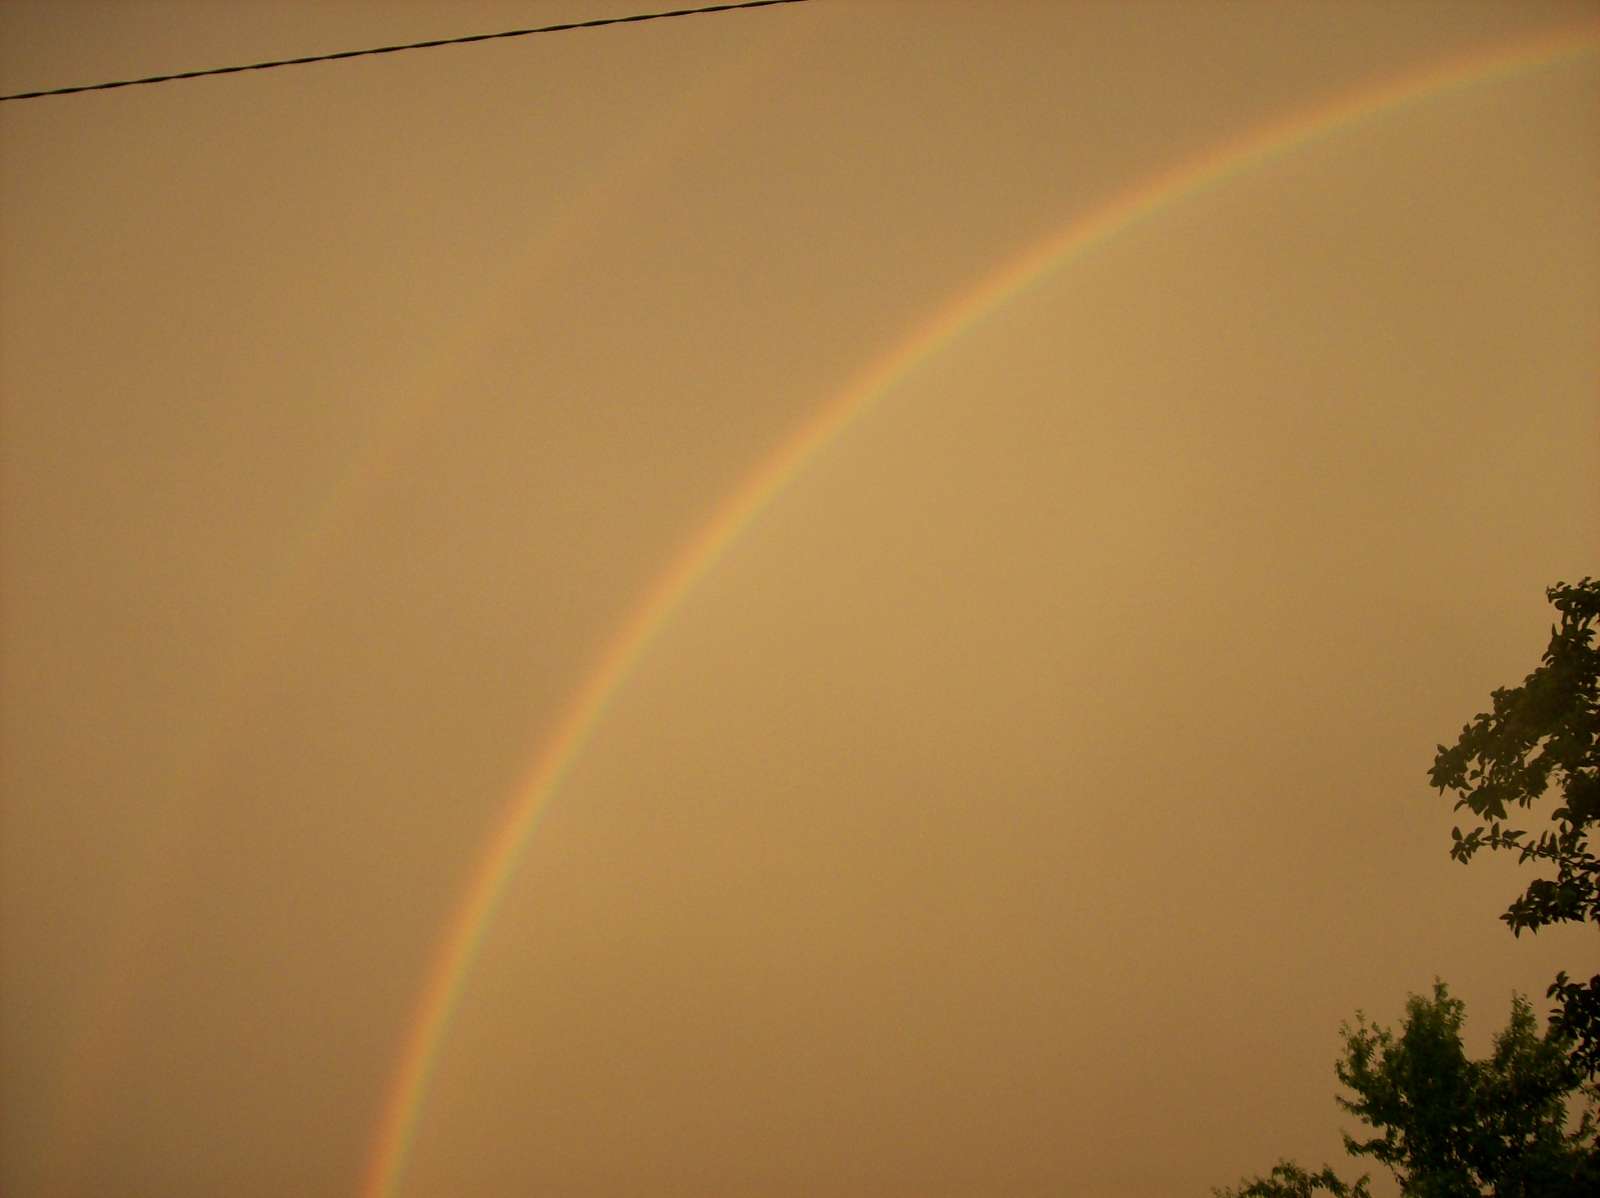 Rainbow over Bagnarola: 55 KB; click on the image to enlarge